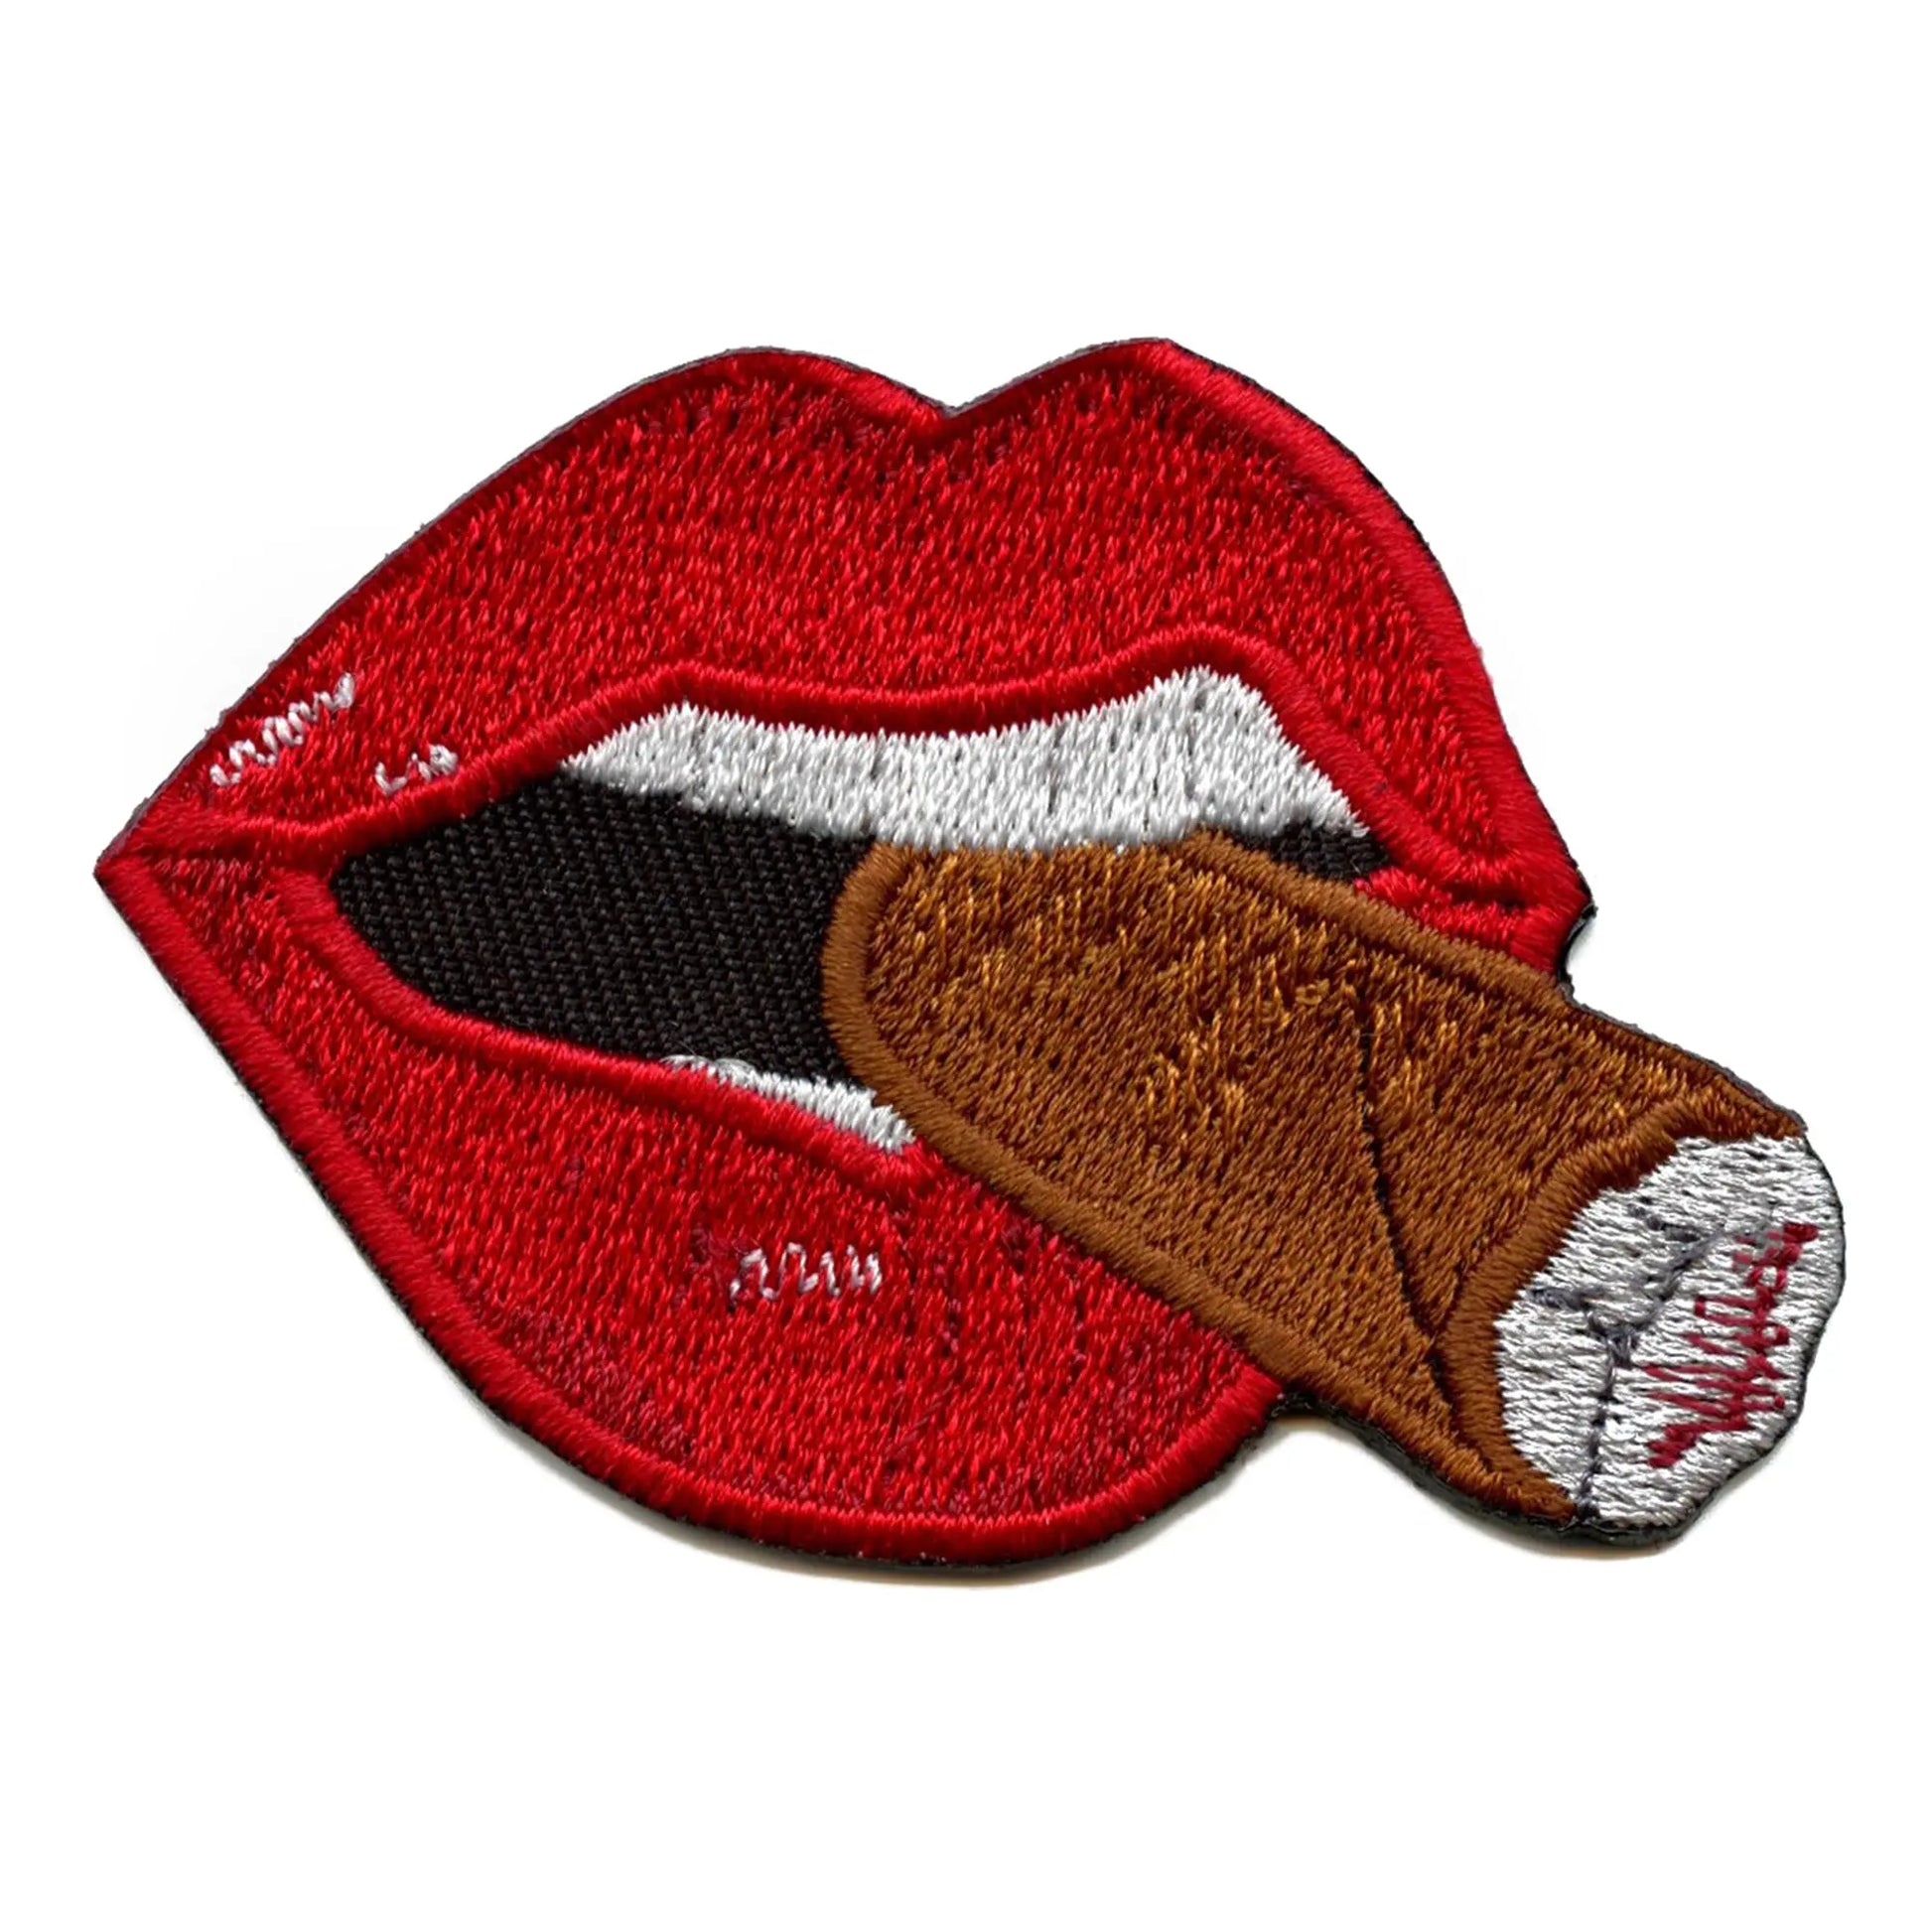 pretty by nature lipstick iron patches for clothing brand patch